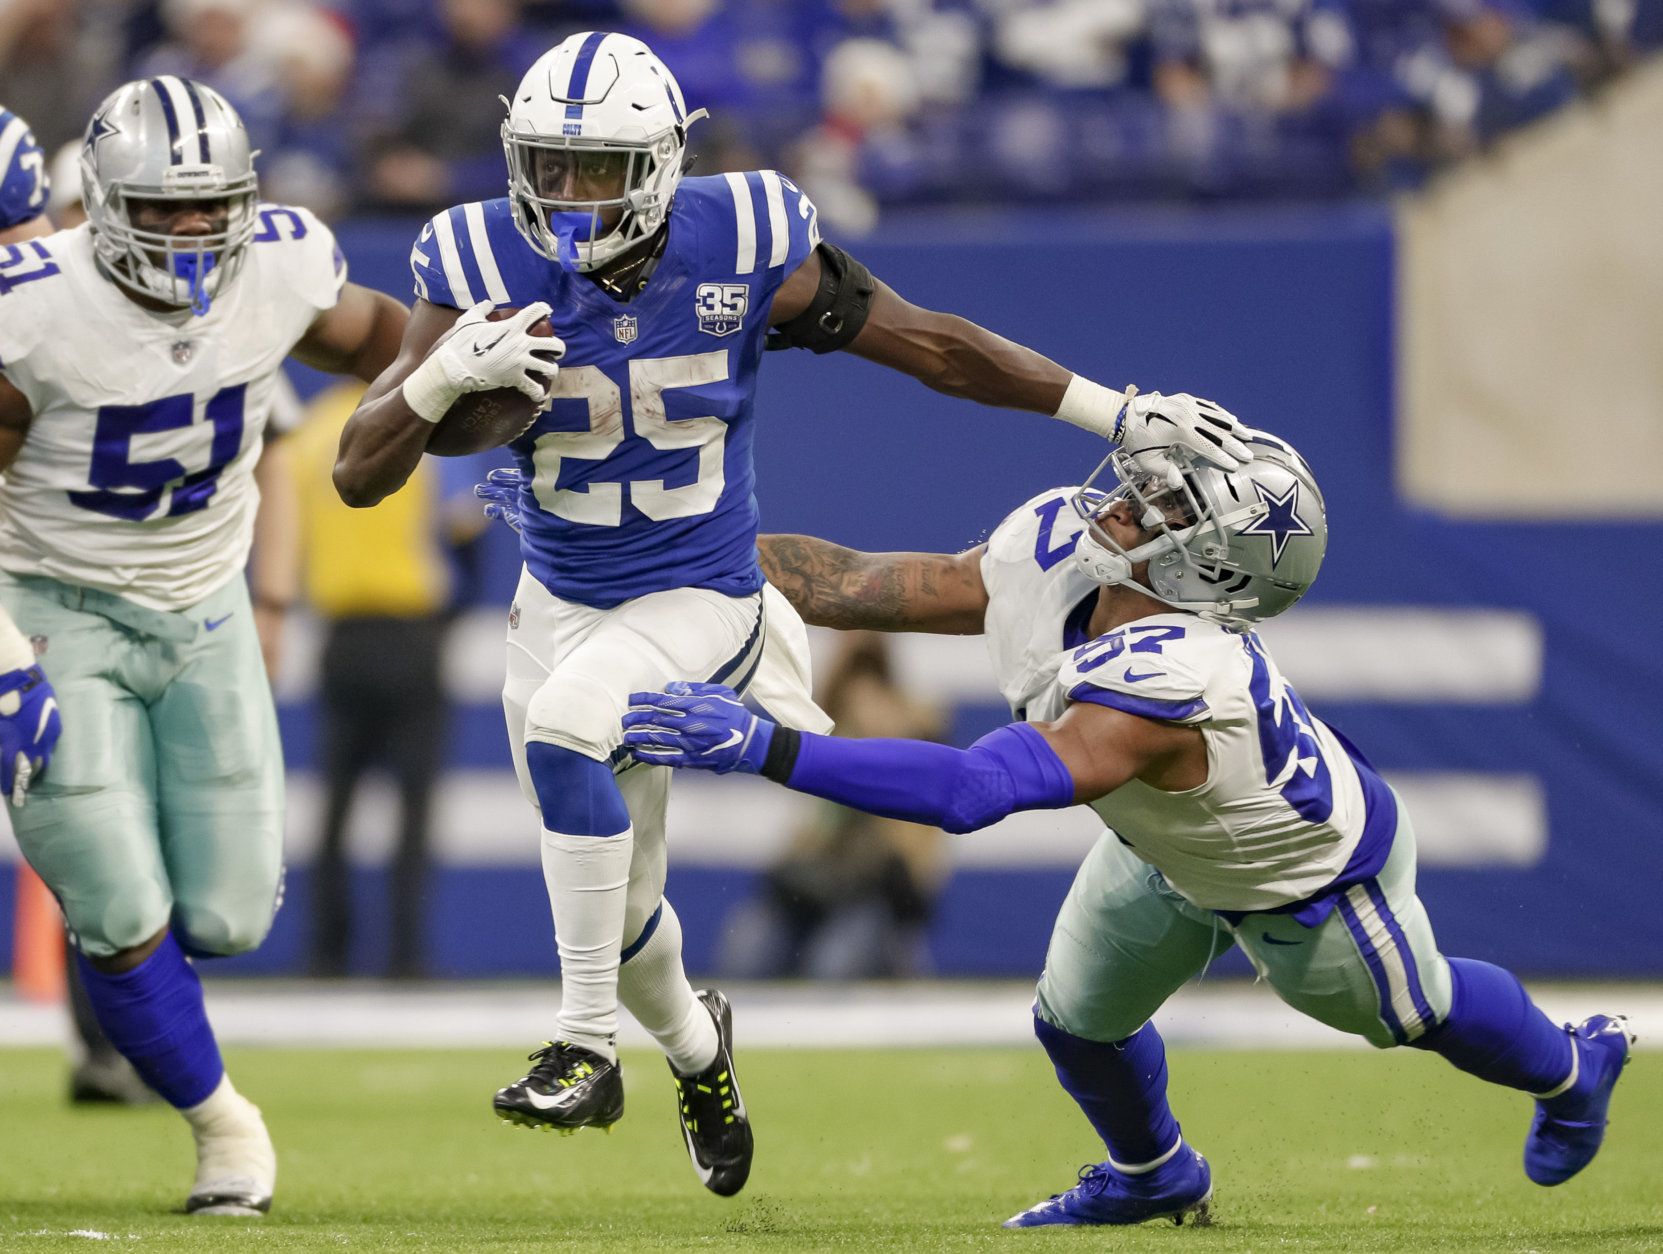 INDIANAPOLIS, IN - DECEMBER 16: Marlon Mack #25 of the Indianapolis Colts puts the stiff arm to Damien Wilson #57 of the Dallas Cowboys during the game at Lucas Oil Stadium on December 16, 2018 in Indianapolis, Indiana. (Photo by Michael Hickey/Getty Images)